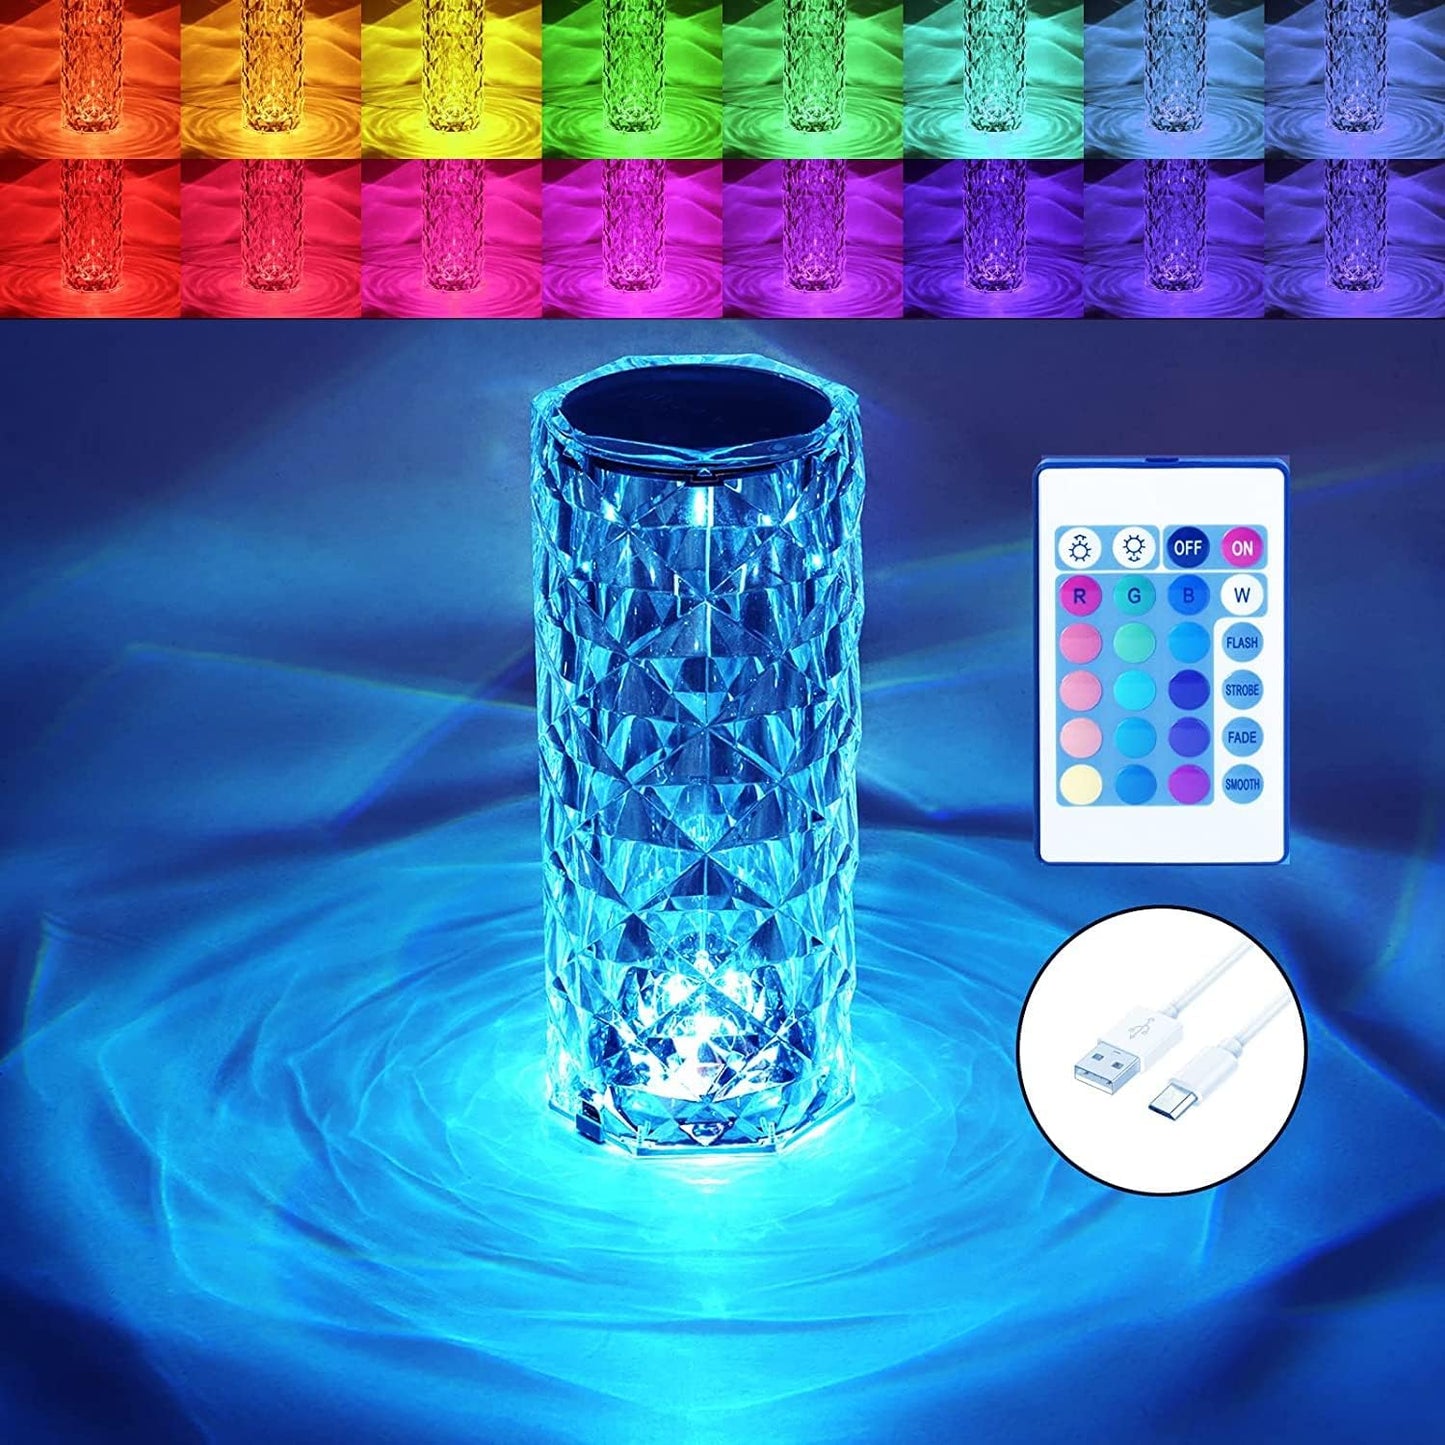 Crystal Lamp 16 Color Changing Rose Crystal Diamond Table Lamp, USB Rechargeable Touch Control Bedside Lamp Night Light with Remote Control, for Bedroom Living Room, Bedroom, Party, Dinner Decor.